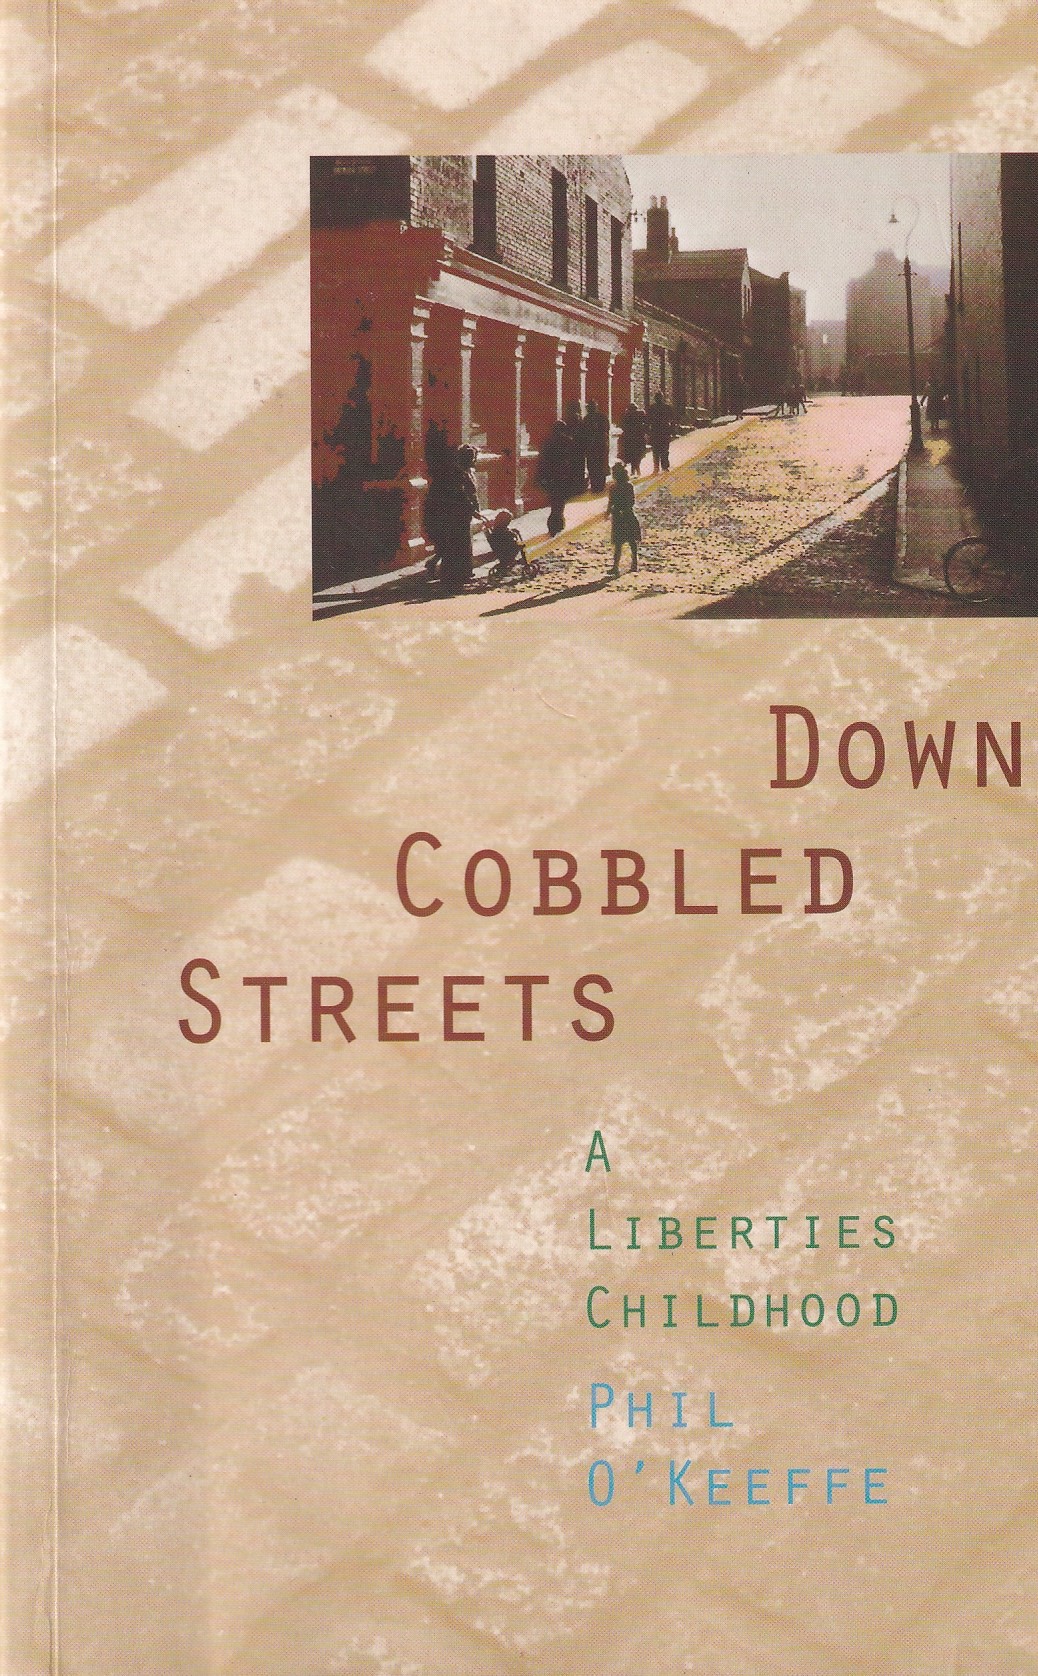 Down Cobbled Streets: A Liberties Childhood | Phil O'Keeffe | Charlie Byrne's